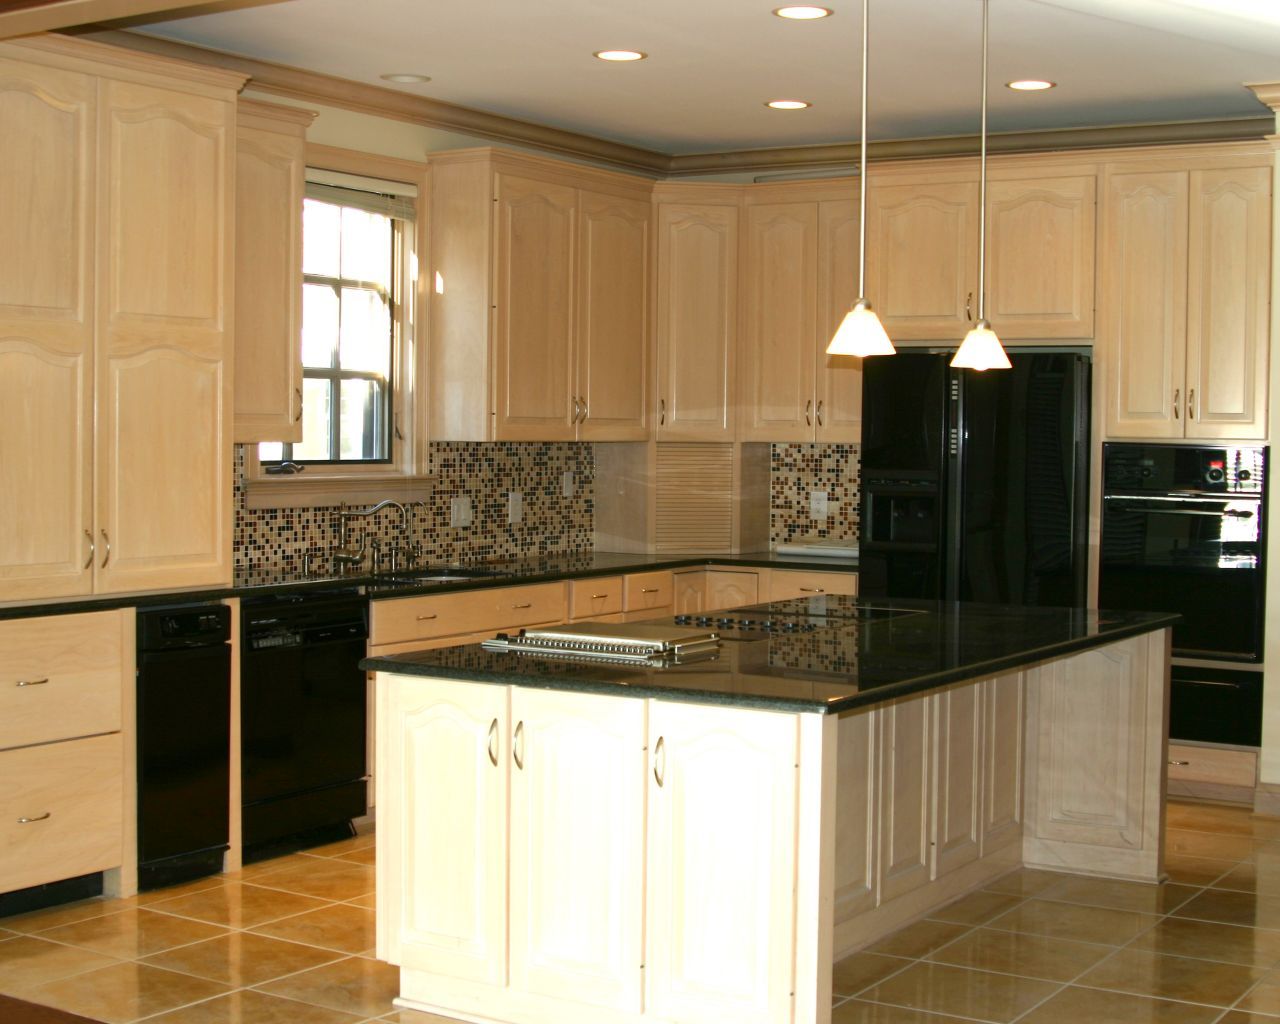 2014 kitchen remodeling design trends & ideas Cleveland, Akron Ohio